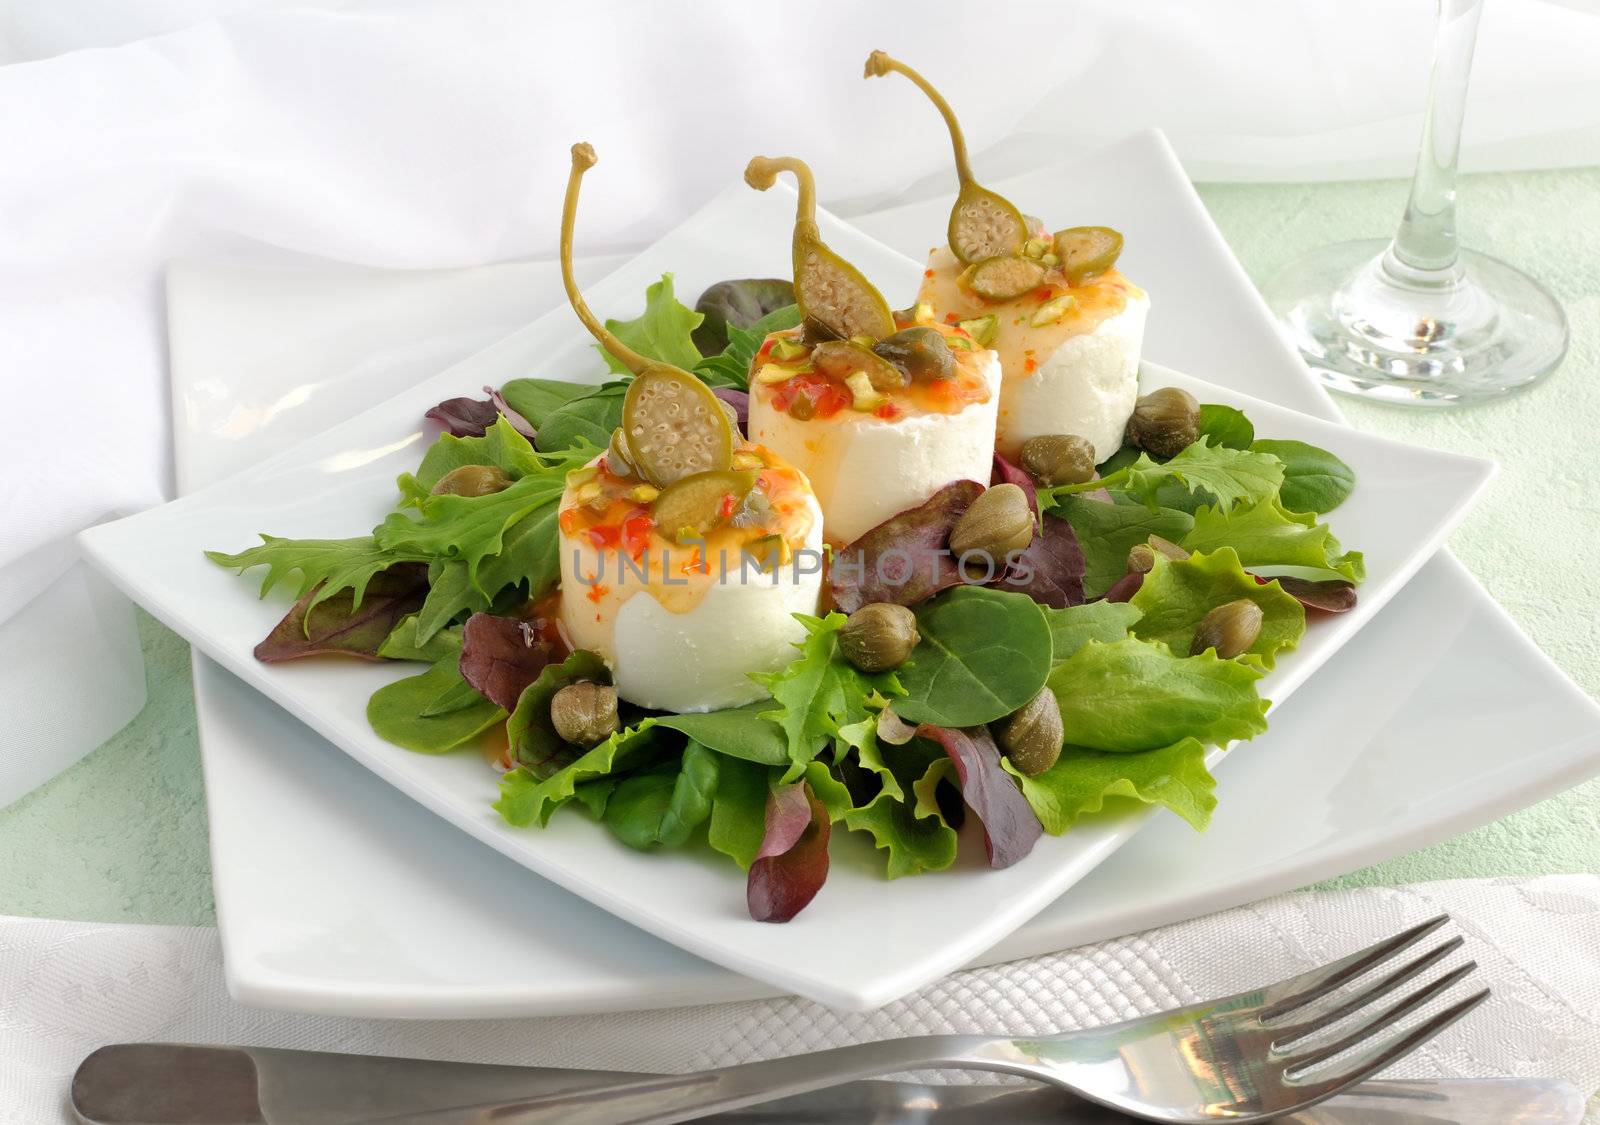 Cheese and capers sweet and sour sauce and pistachios in green leaves